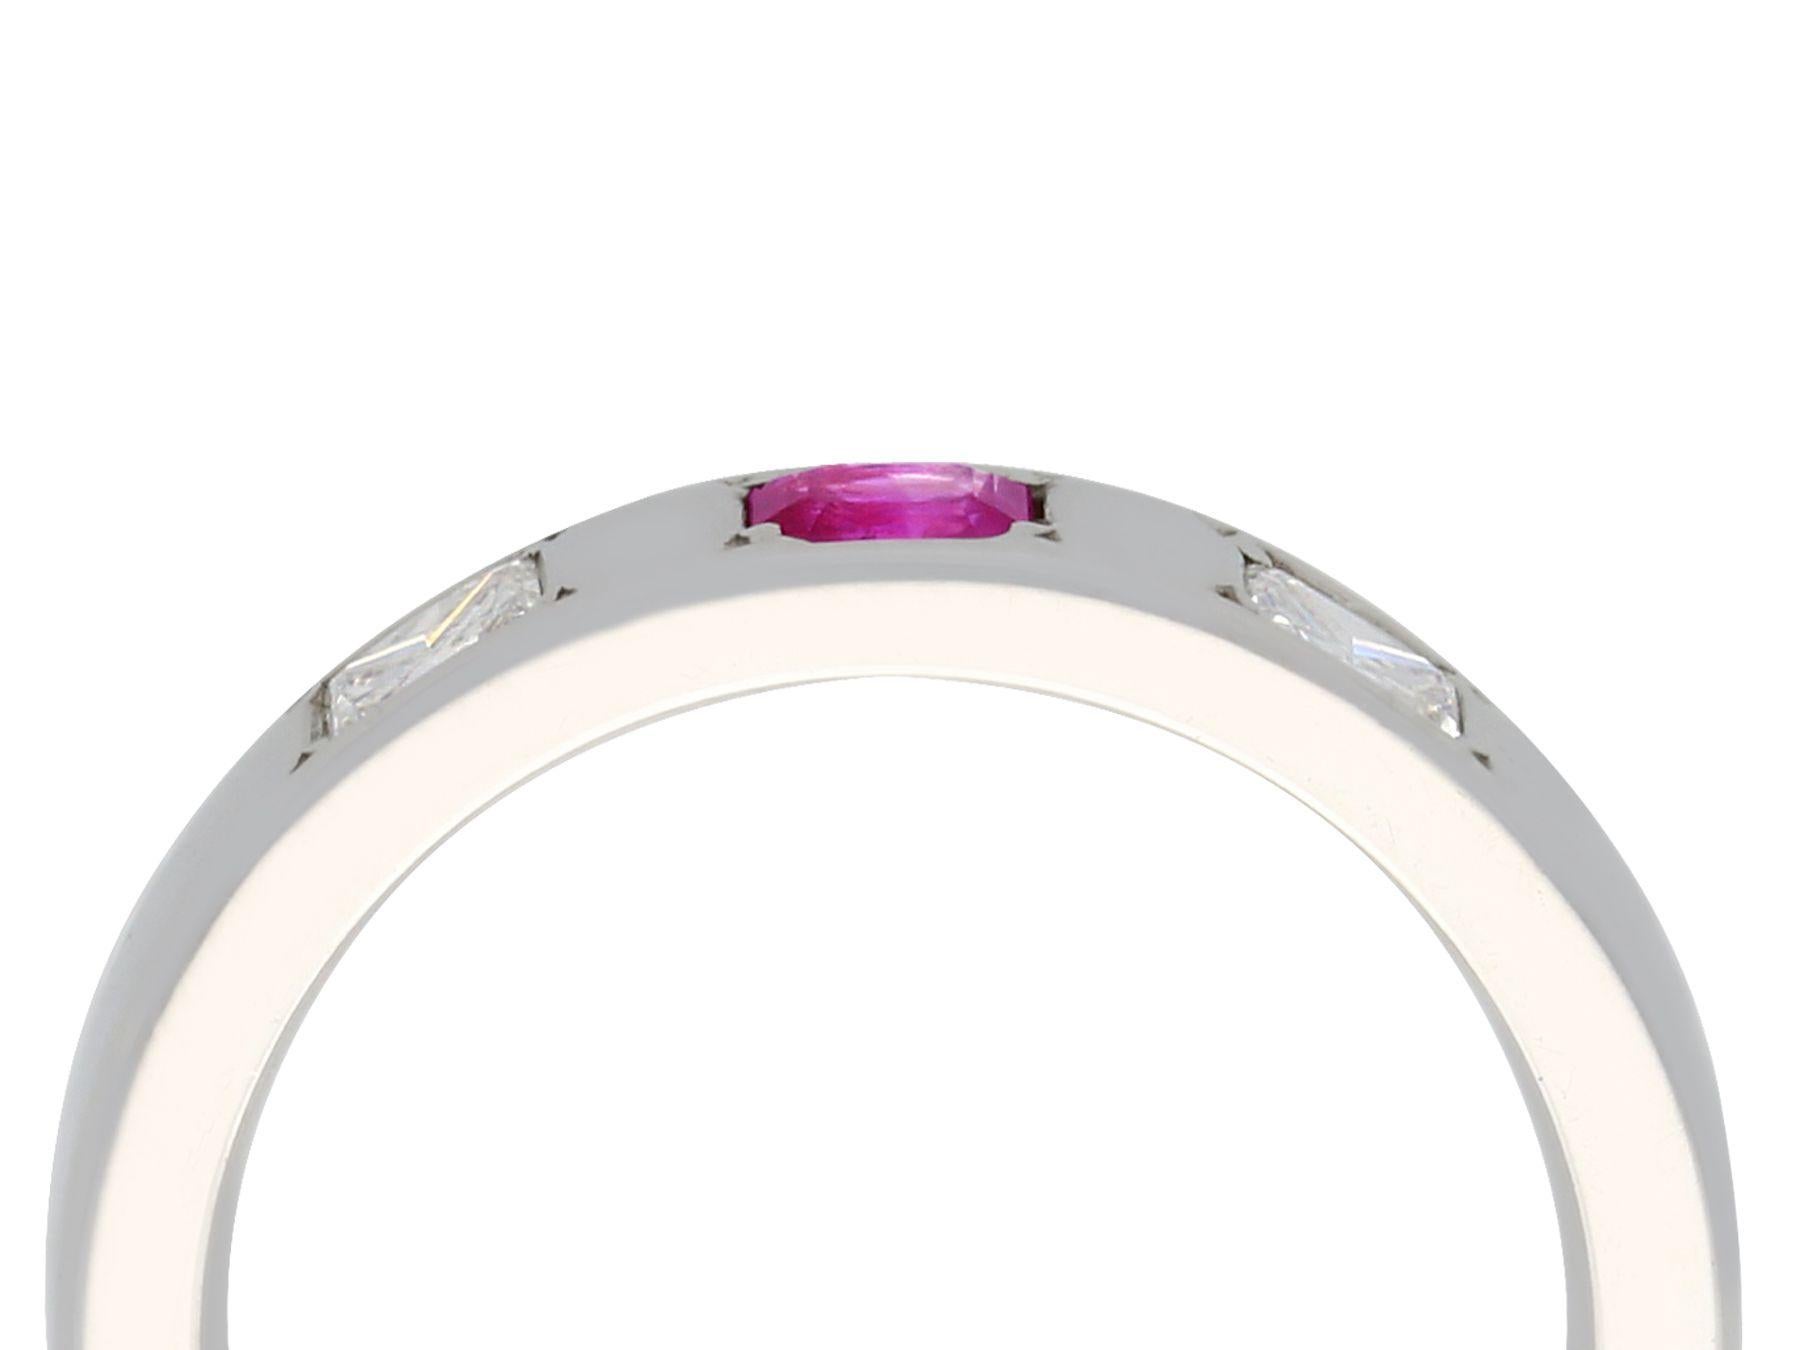 A very good contemporary princess cut 0.25 carat diamond and 0.13 carat natural ruby, 18 karat white gold ladies ring; part of our contemporary jewelry and estate jewelry collections

This diamond and ruby band ring has been crafted in 18k white